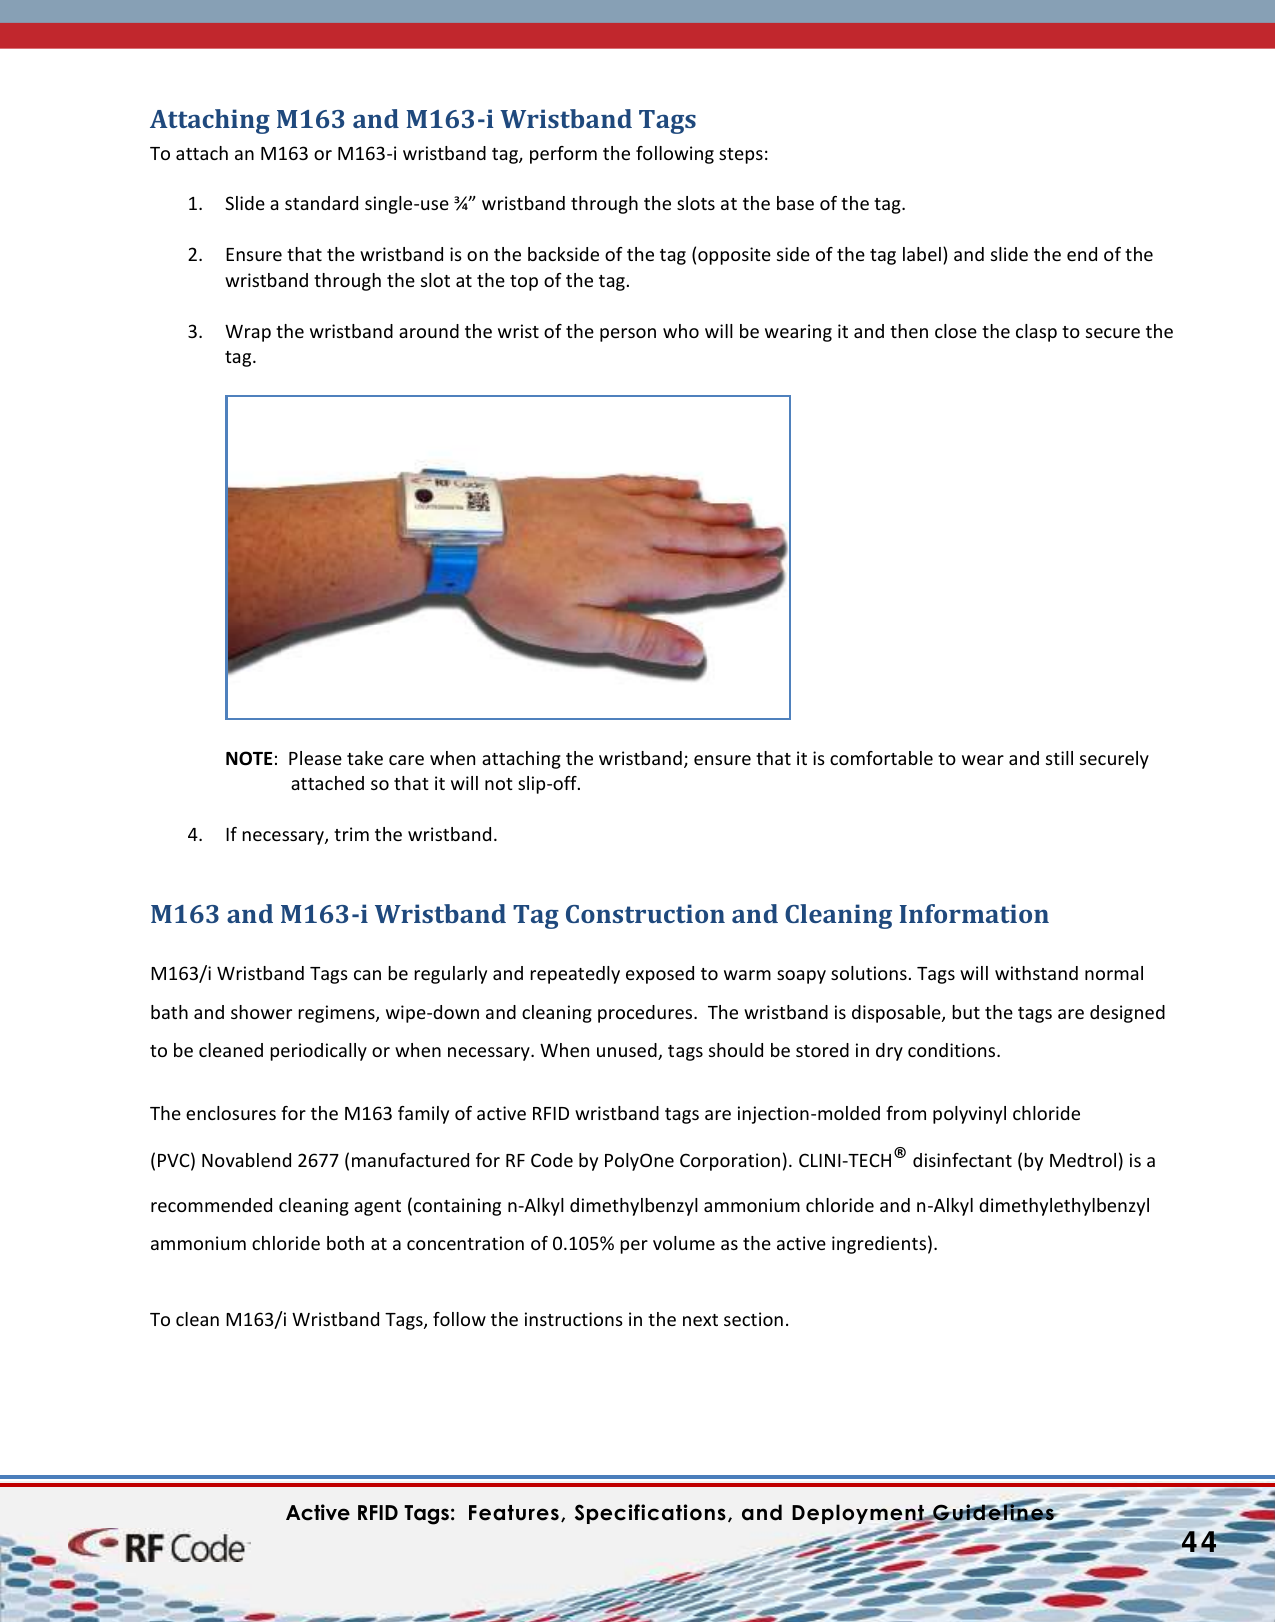    Active RFID Tags:  Features, Specifications, and Deployment Guidelines           44        Attaching M163 and M163-i Wristband Tags To attach an M163 or M163-i wristband tag, perform the following steps:  1. Slide a standard single-use ¾” wristband through the slots at the base of the tag.   2. Ensure that the wristband is on the backside of the tag (opposite side of the tag label) and slide the end of the wristband through the slot at the top of the tag.   3. Wrap the wristband around the wrist of the person who will be wearing it and then close the clasp to secure the tag.     NOTE:  Please take care when attaching the wristband; ensure that it is comfortable to wear and still securely attached so that it will not slip-off.  4. If necessary, trim the wristband.  M163 and M163-i Wristband Tag Construction and Cleaning Information  M163/i Wristband Tags can be regularly and repeatedly exposed to warm soapy solutions. Tags will withstand normal bath and shower regimens, wipe-down and cleaning procedures.  The wristband is disposable, but the tags are designed to be cleaned periodically or when necessary. When unused, tags should be stored in dry conditions.    The enclosures for the M163 family of active RFID wristband tags are injection-molded from polyvinyl chloride (PVC) Novablend 2677 (manufactured for RF Code by PolyOne Corporation). CLINI-TECH® disinfectant (by Medtrol) is a recommended cleaning agent (containing n-Alkyl dimethylbenzyl ammonium chloride and n-Alkyl dimethylethylbenzyl ammonium chloride both at a concentration of 0.105% per volume as the active ingredients).  To clean M163/i Wristband Tags, follow the instructions in the next section. 